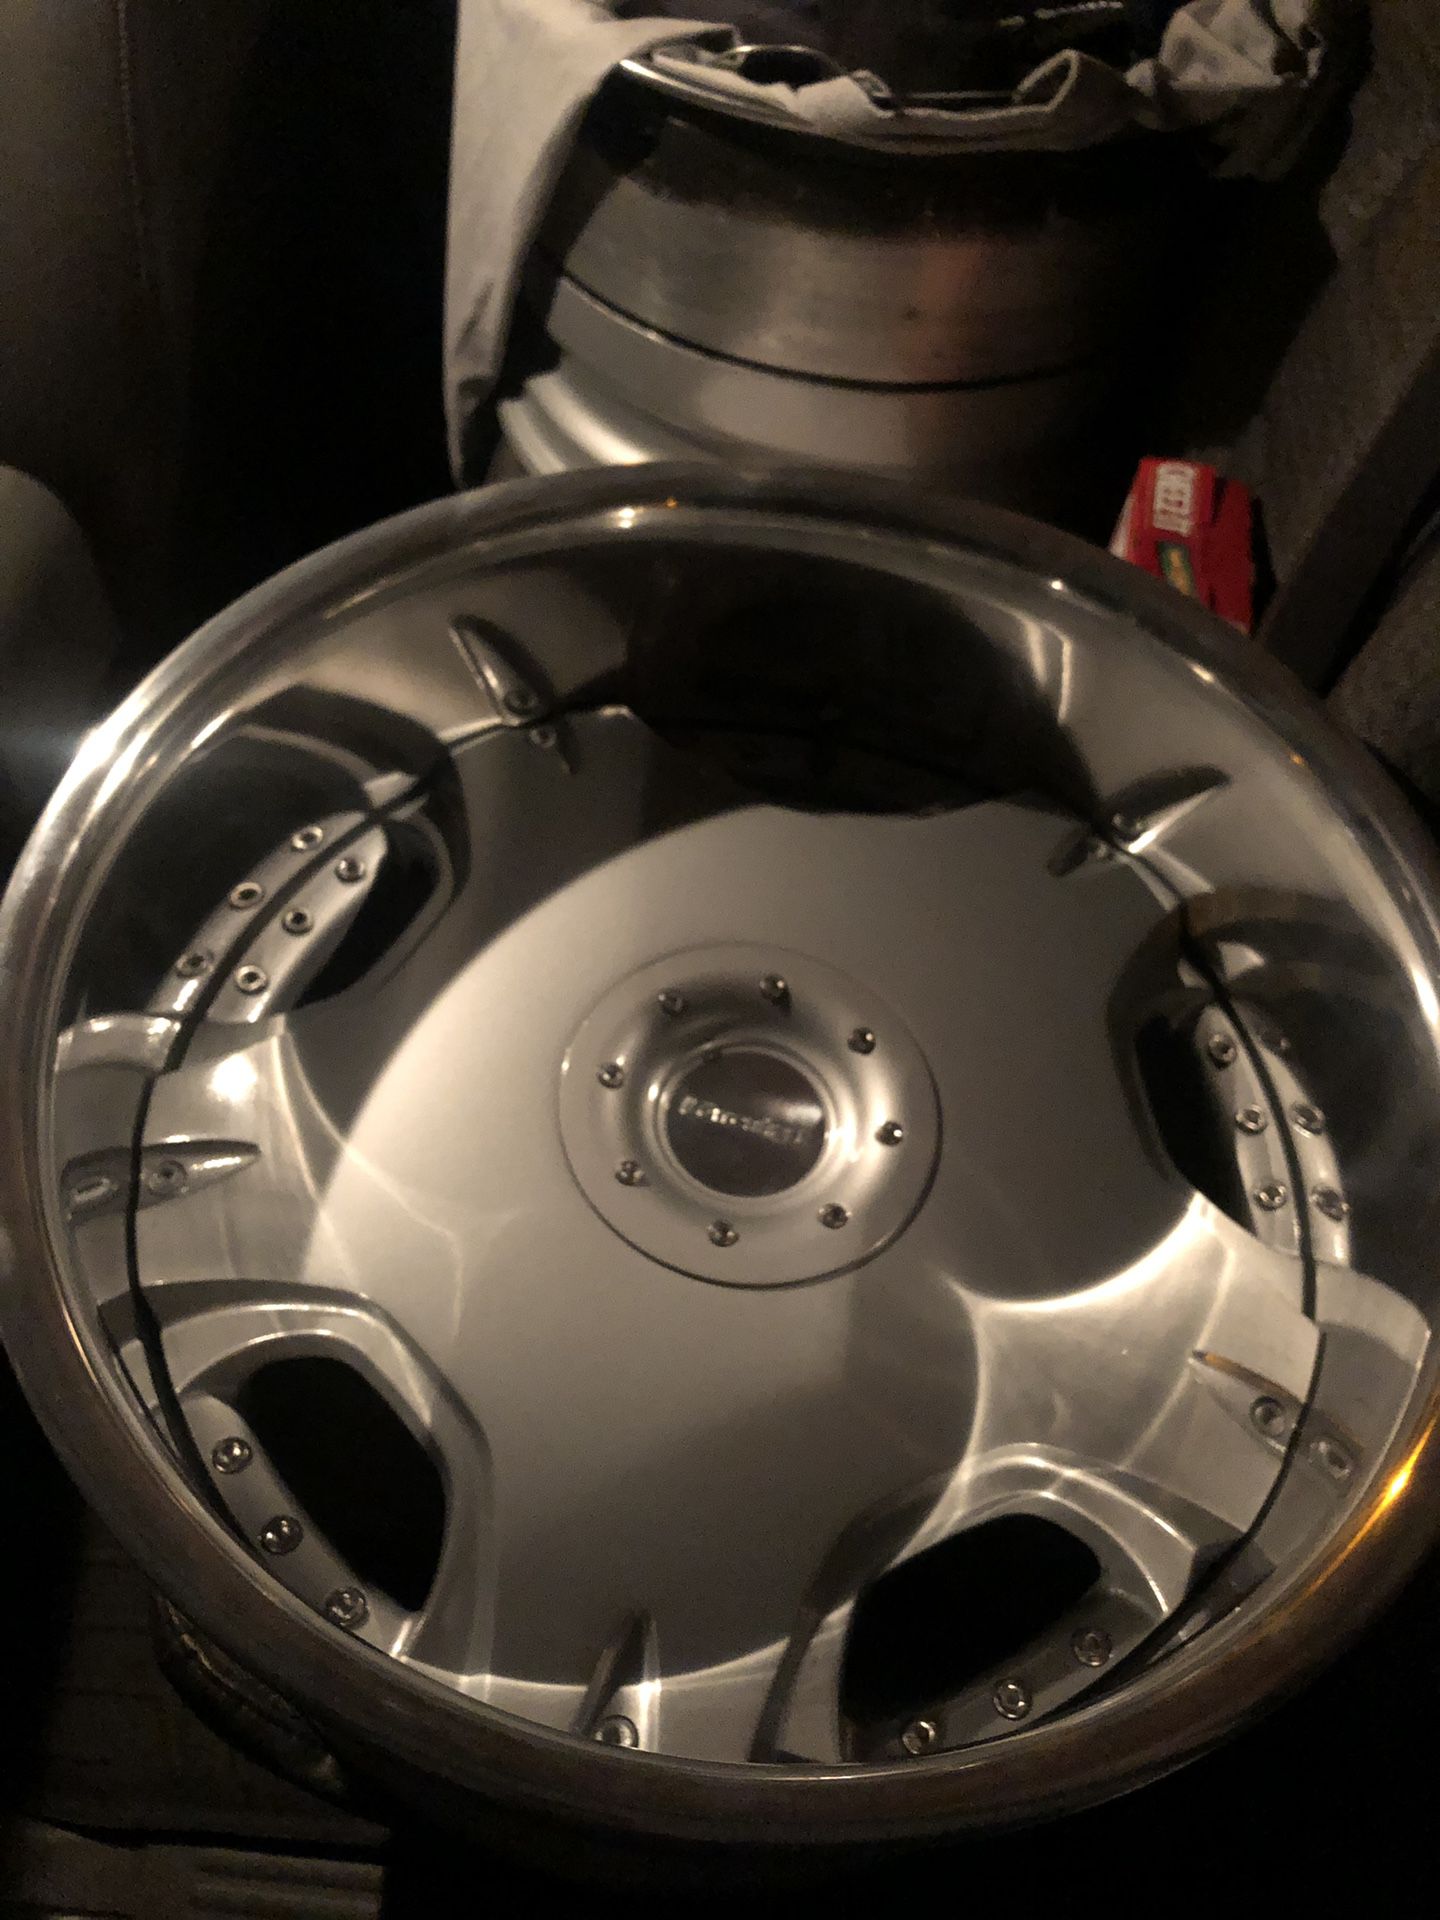 Lowenhart ldr vip wheels for Sale in San Marcos, CA - OfferUp